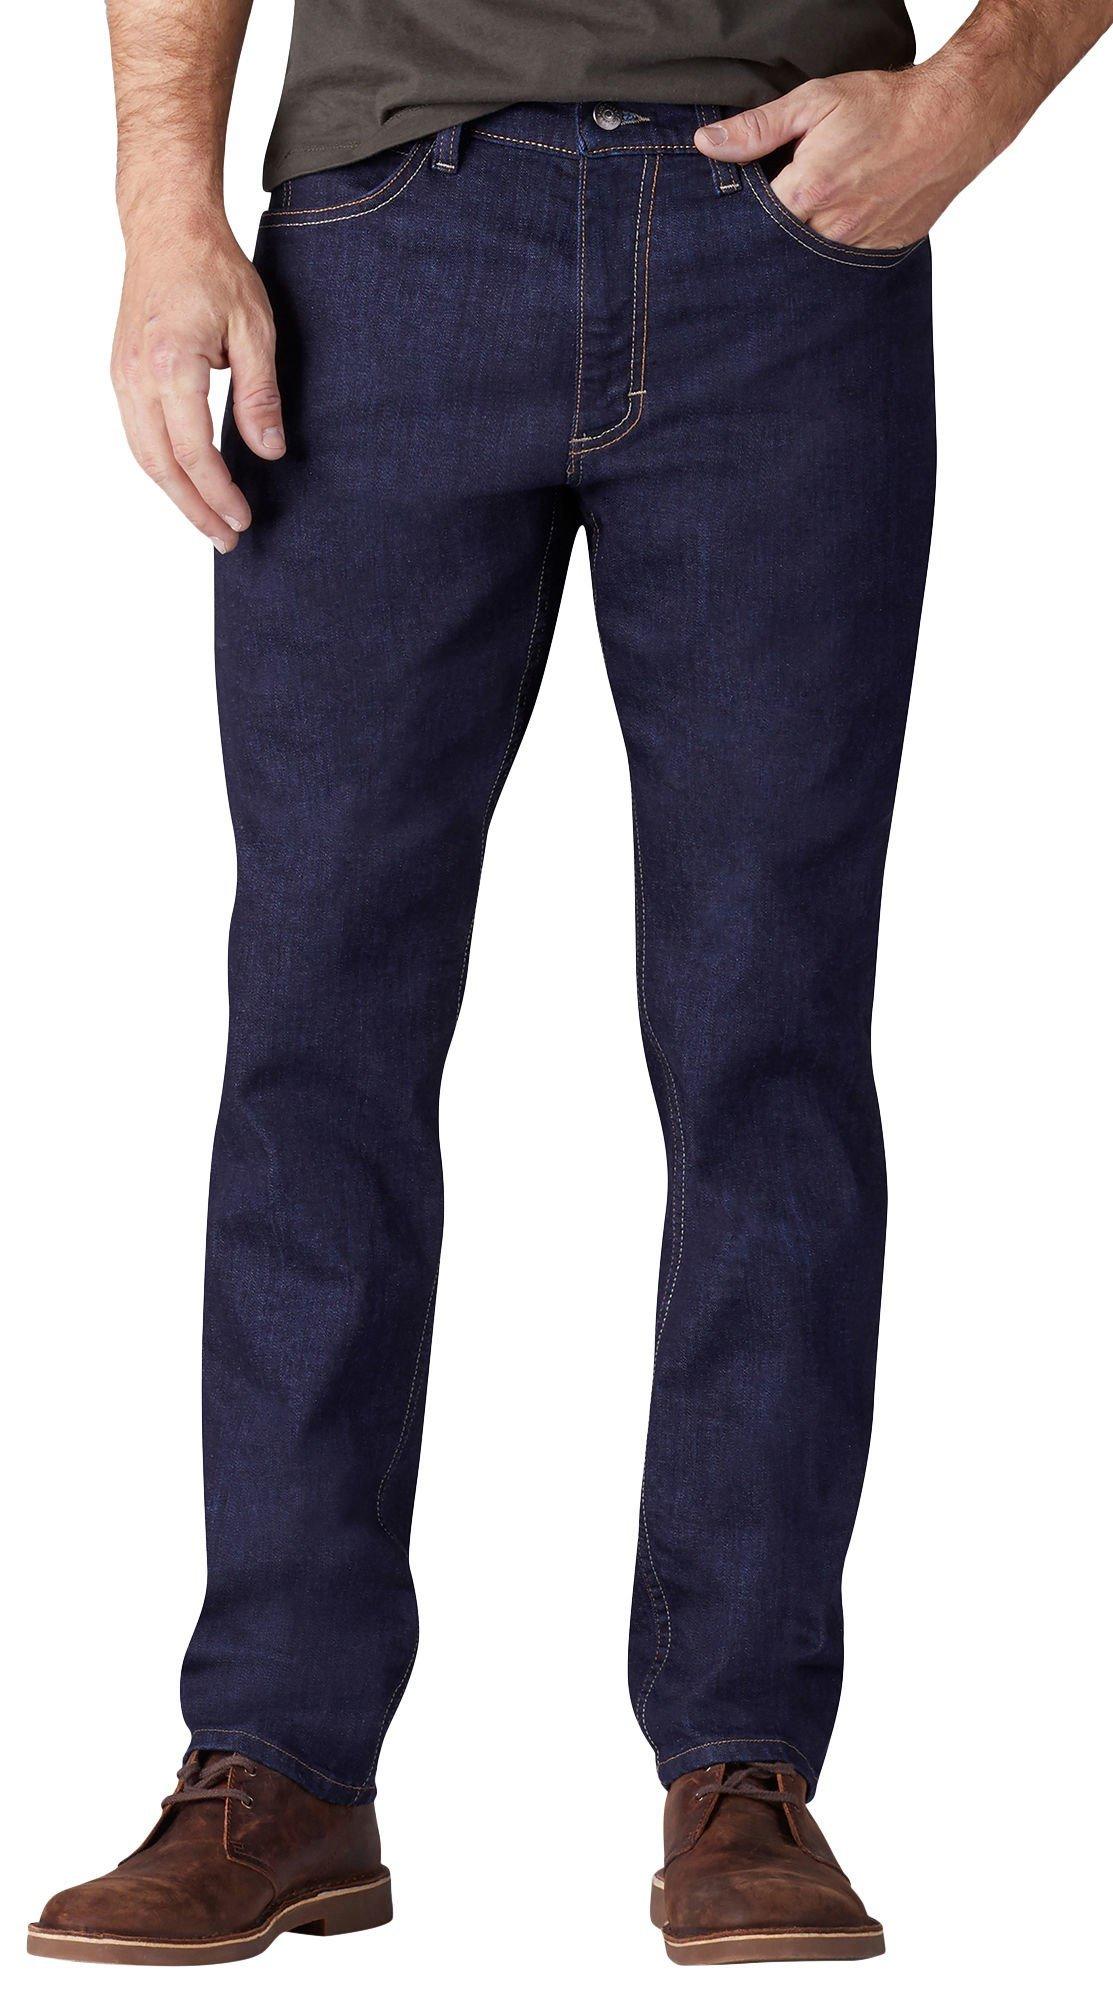 Men's Jeans | Performance Fit to Rugged Wear | Bealls Florida